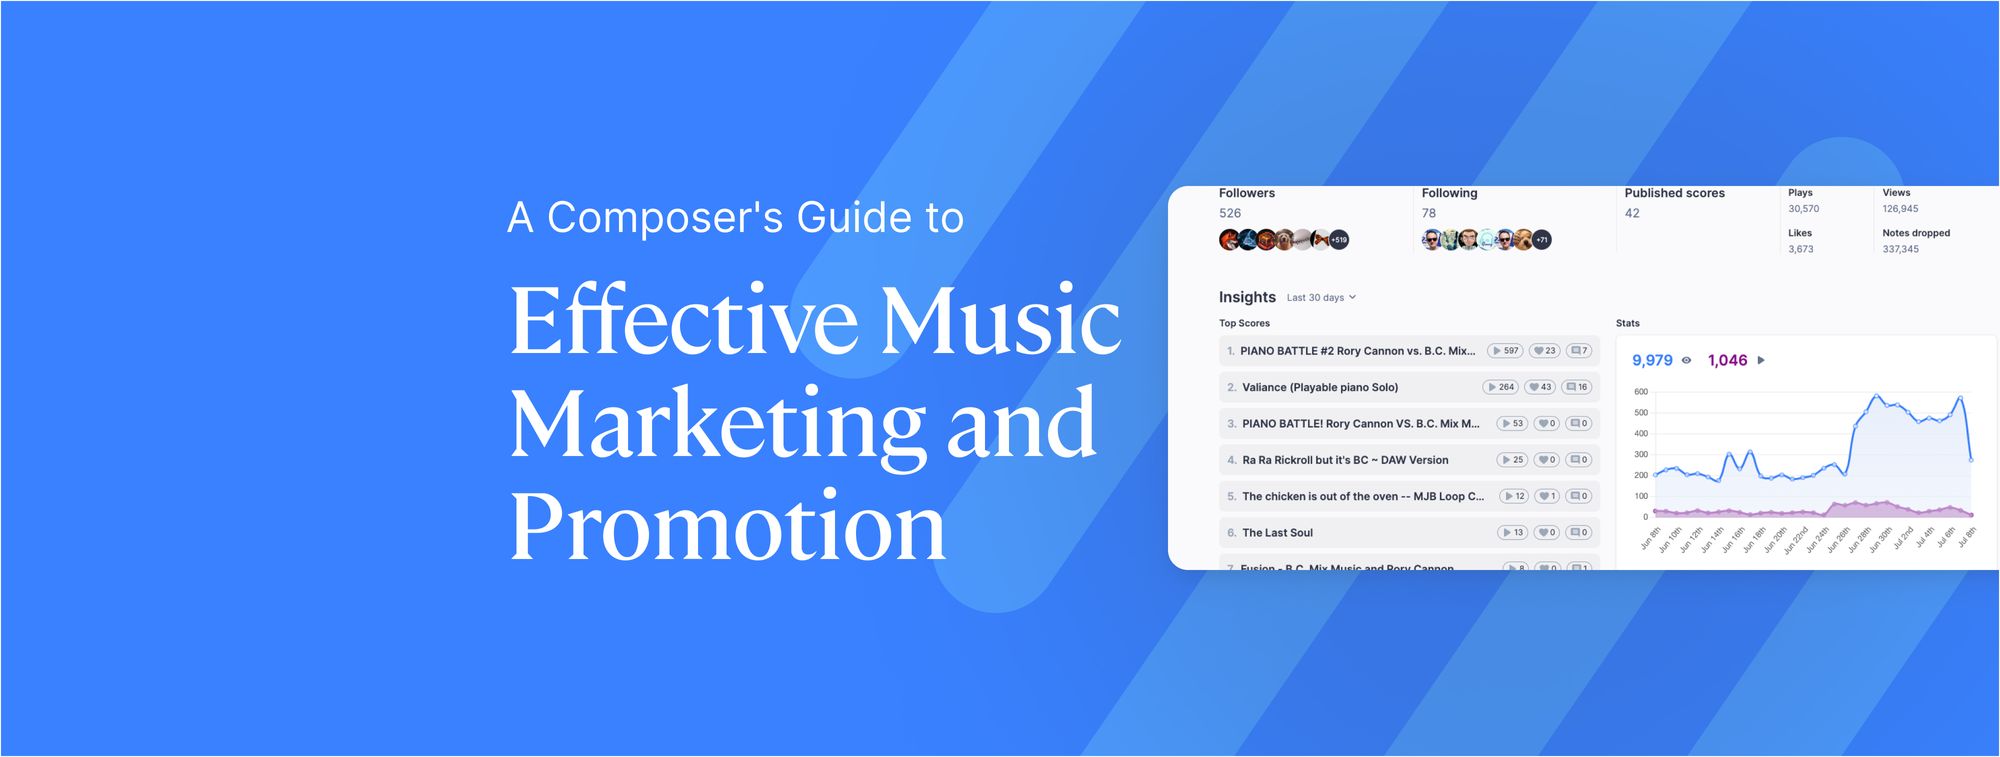 A Composer's Guide to Effective Music Marketing and Promotion